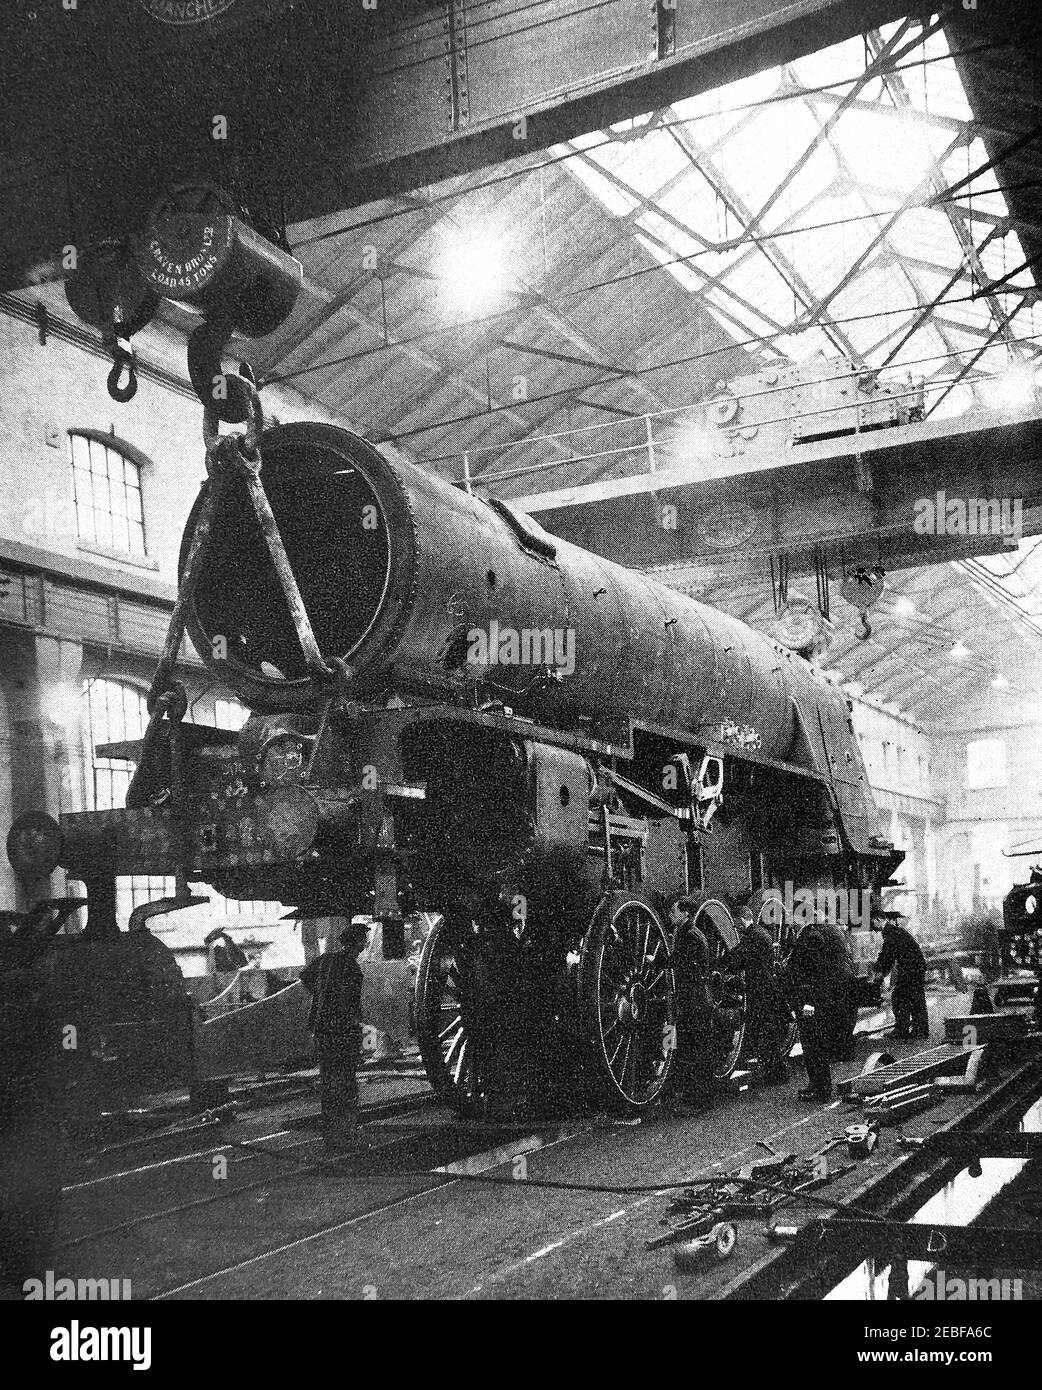 An early press photograph of  an engine being lowered onto is wheels at the Railway Locomotive works at Doncaster, England.  Doncaster railway works  located in the town of Doncaster, South Yorkshire, England. replaced an earlier works at Boston and Peterborough. Like other factories it was comandeered during WWII to make other items like  Horsa gliders for the D-Day  airborne assault. The carriage building shop was destroyed by ire in 1940, the new buildings built in 1949 were designed to fit  the British Railways standard all steel carriages. Steam train construction finished in 1962. Stock Photo